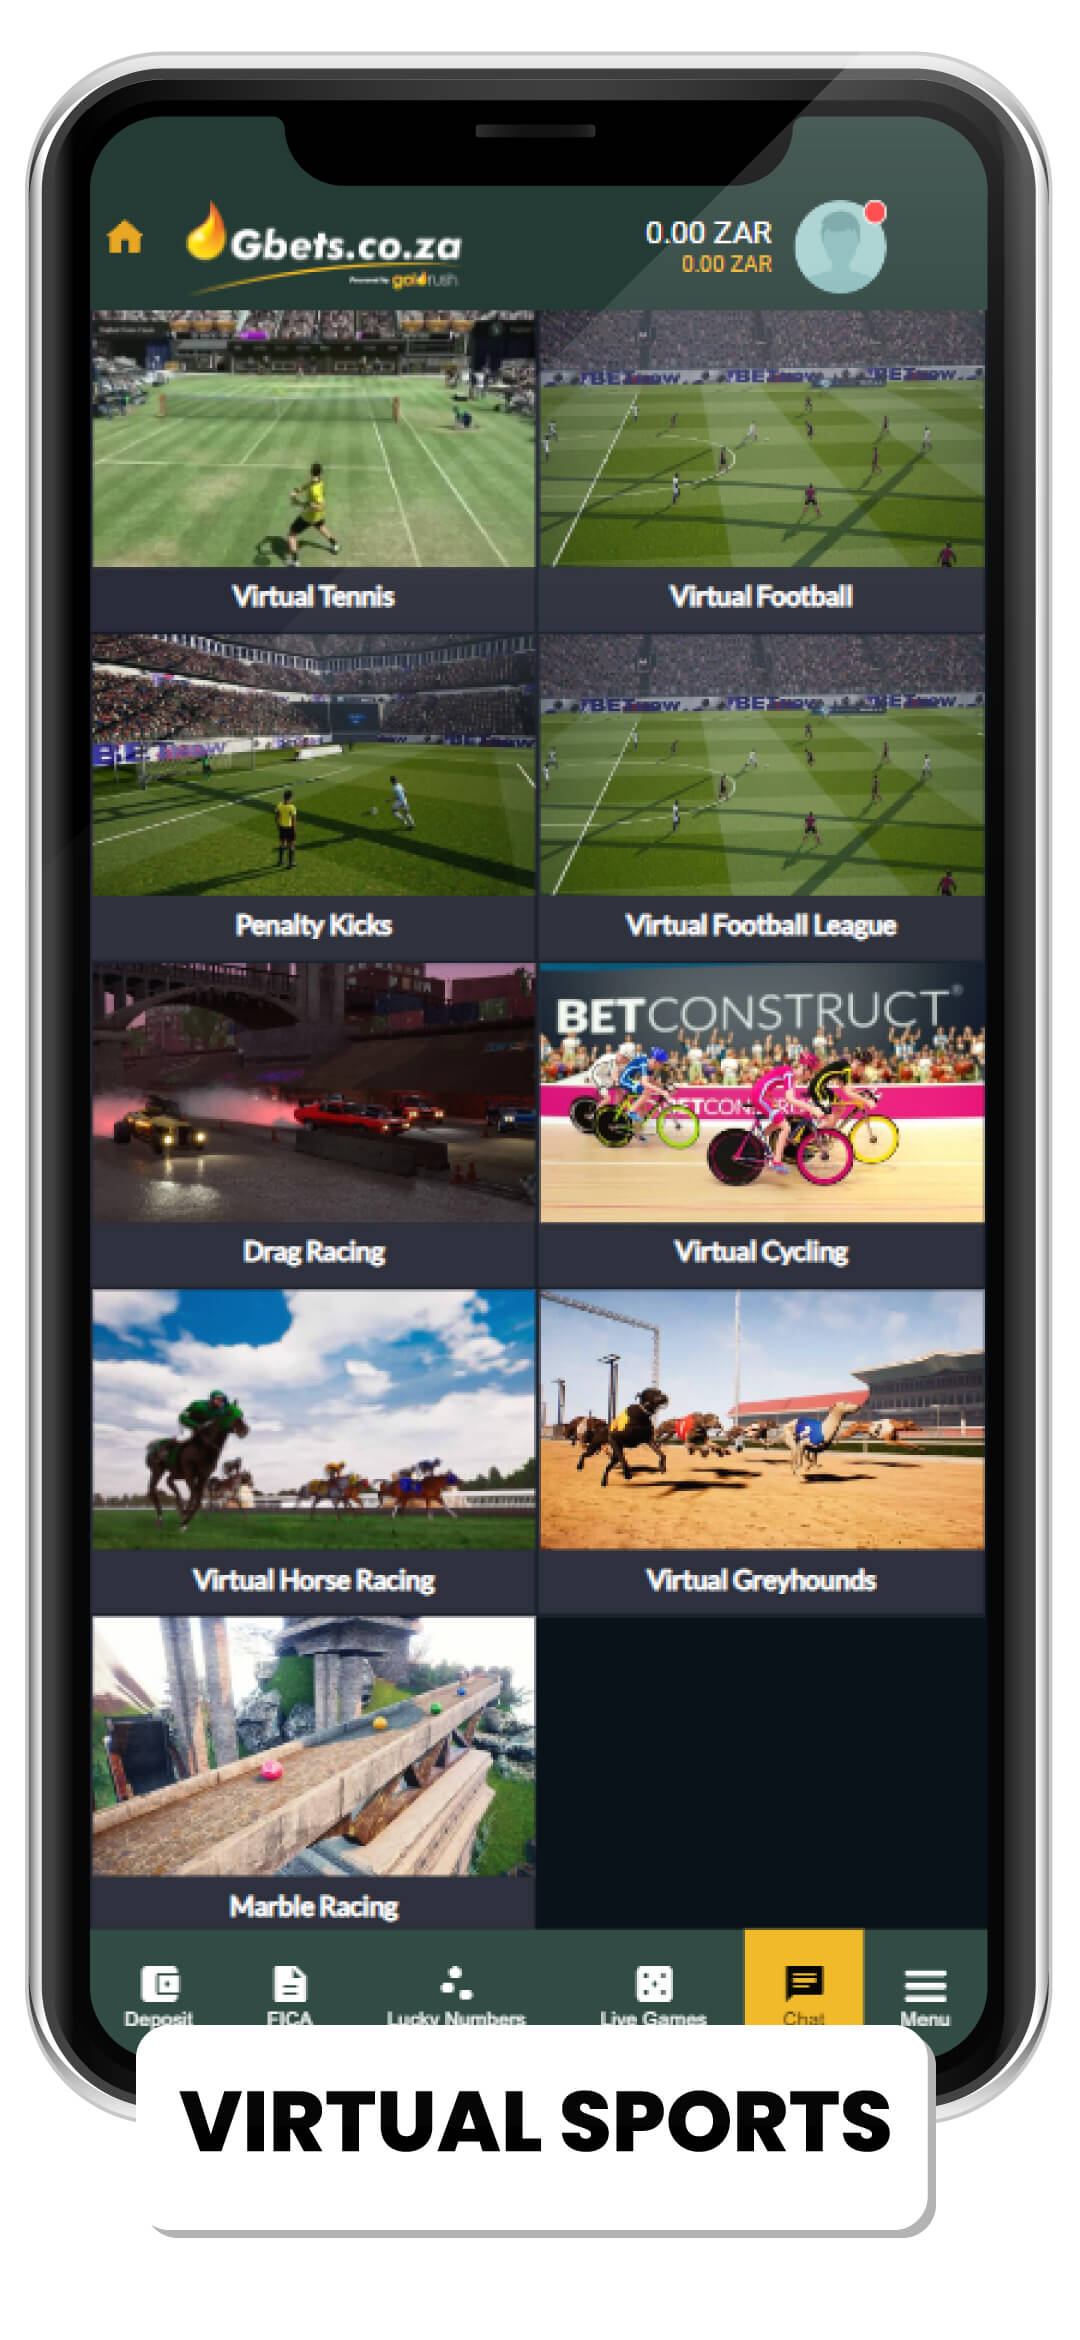 Virtual sports on g bets website